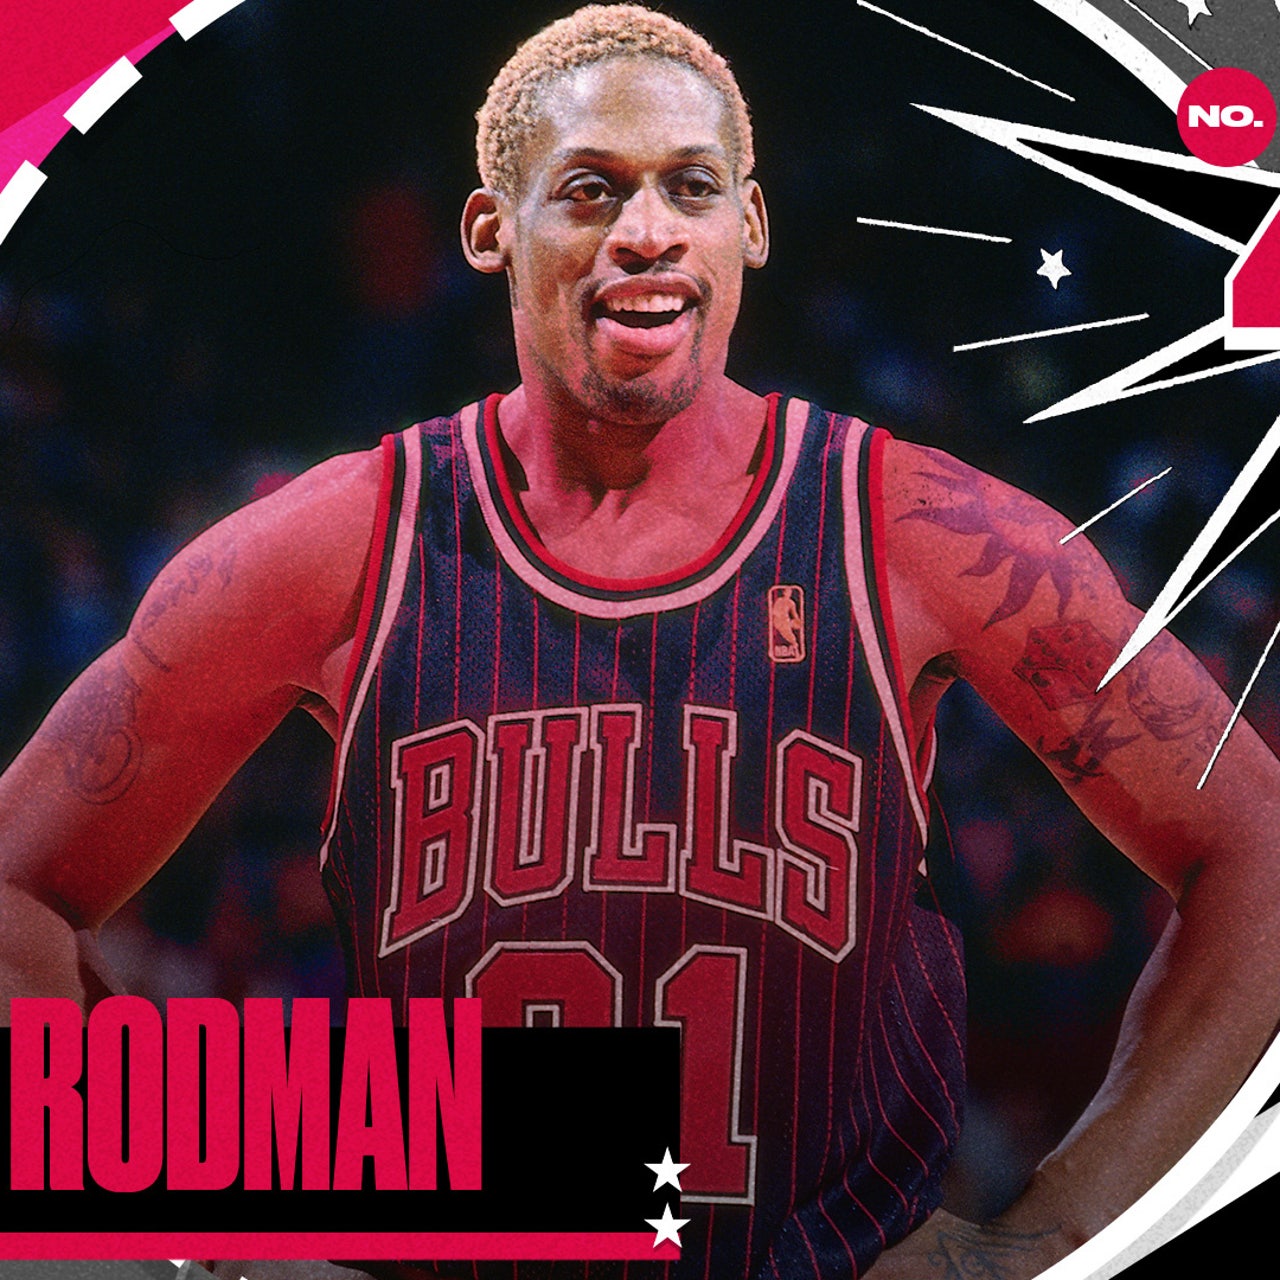 Is Dennis Rodman worthy to go in the Basketball Hall of Fame